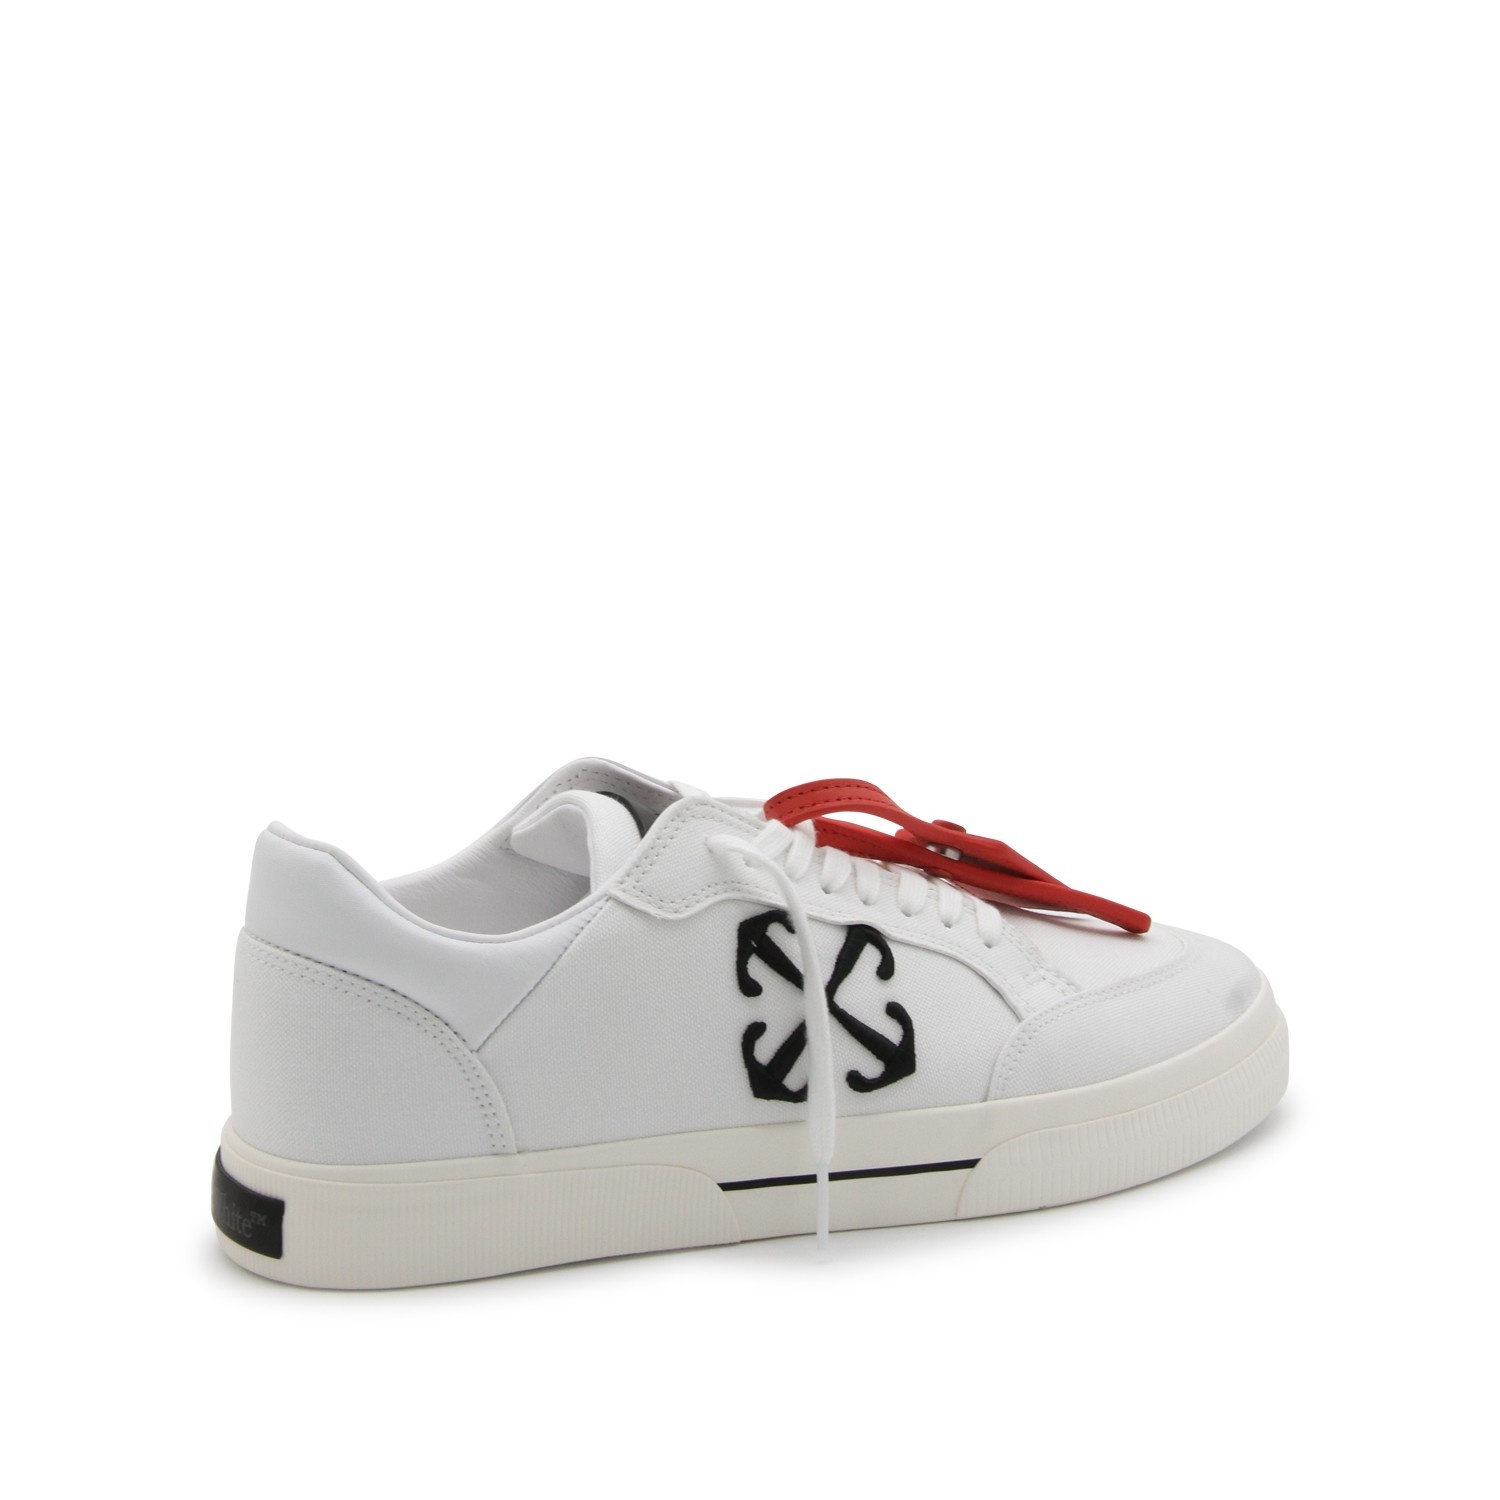 WHITE AND BLACK CANVAS VULCANIZED SNEAKERS - 3